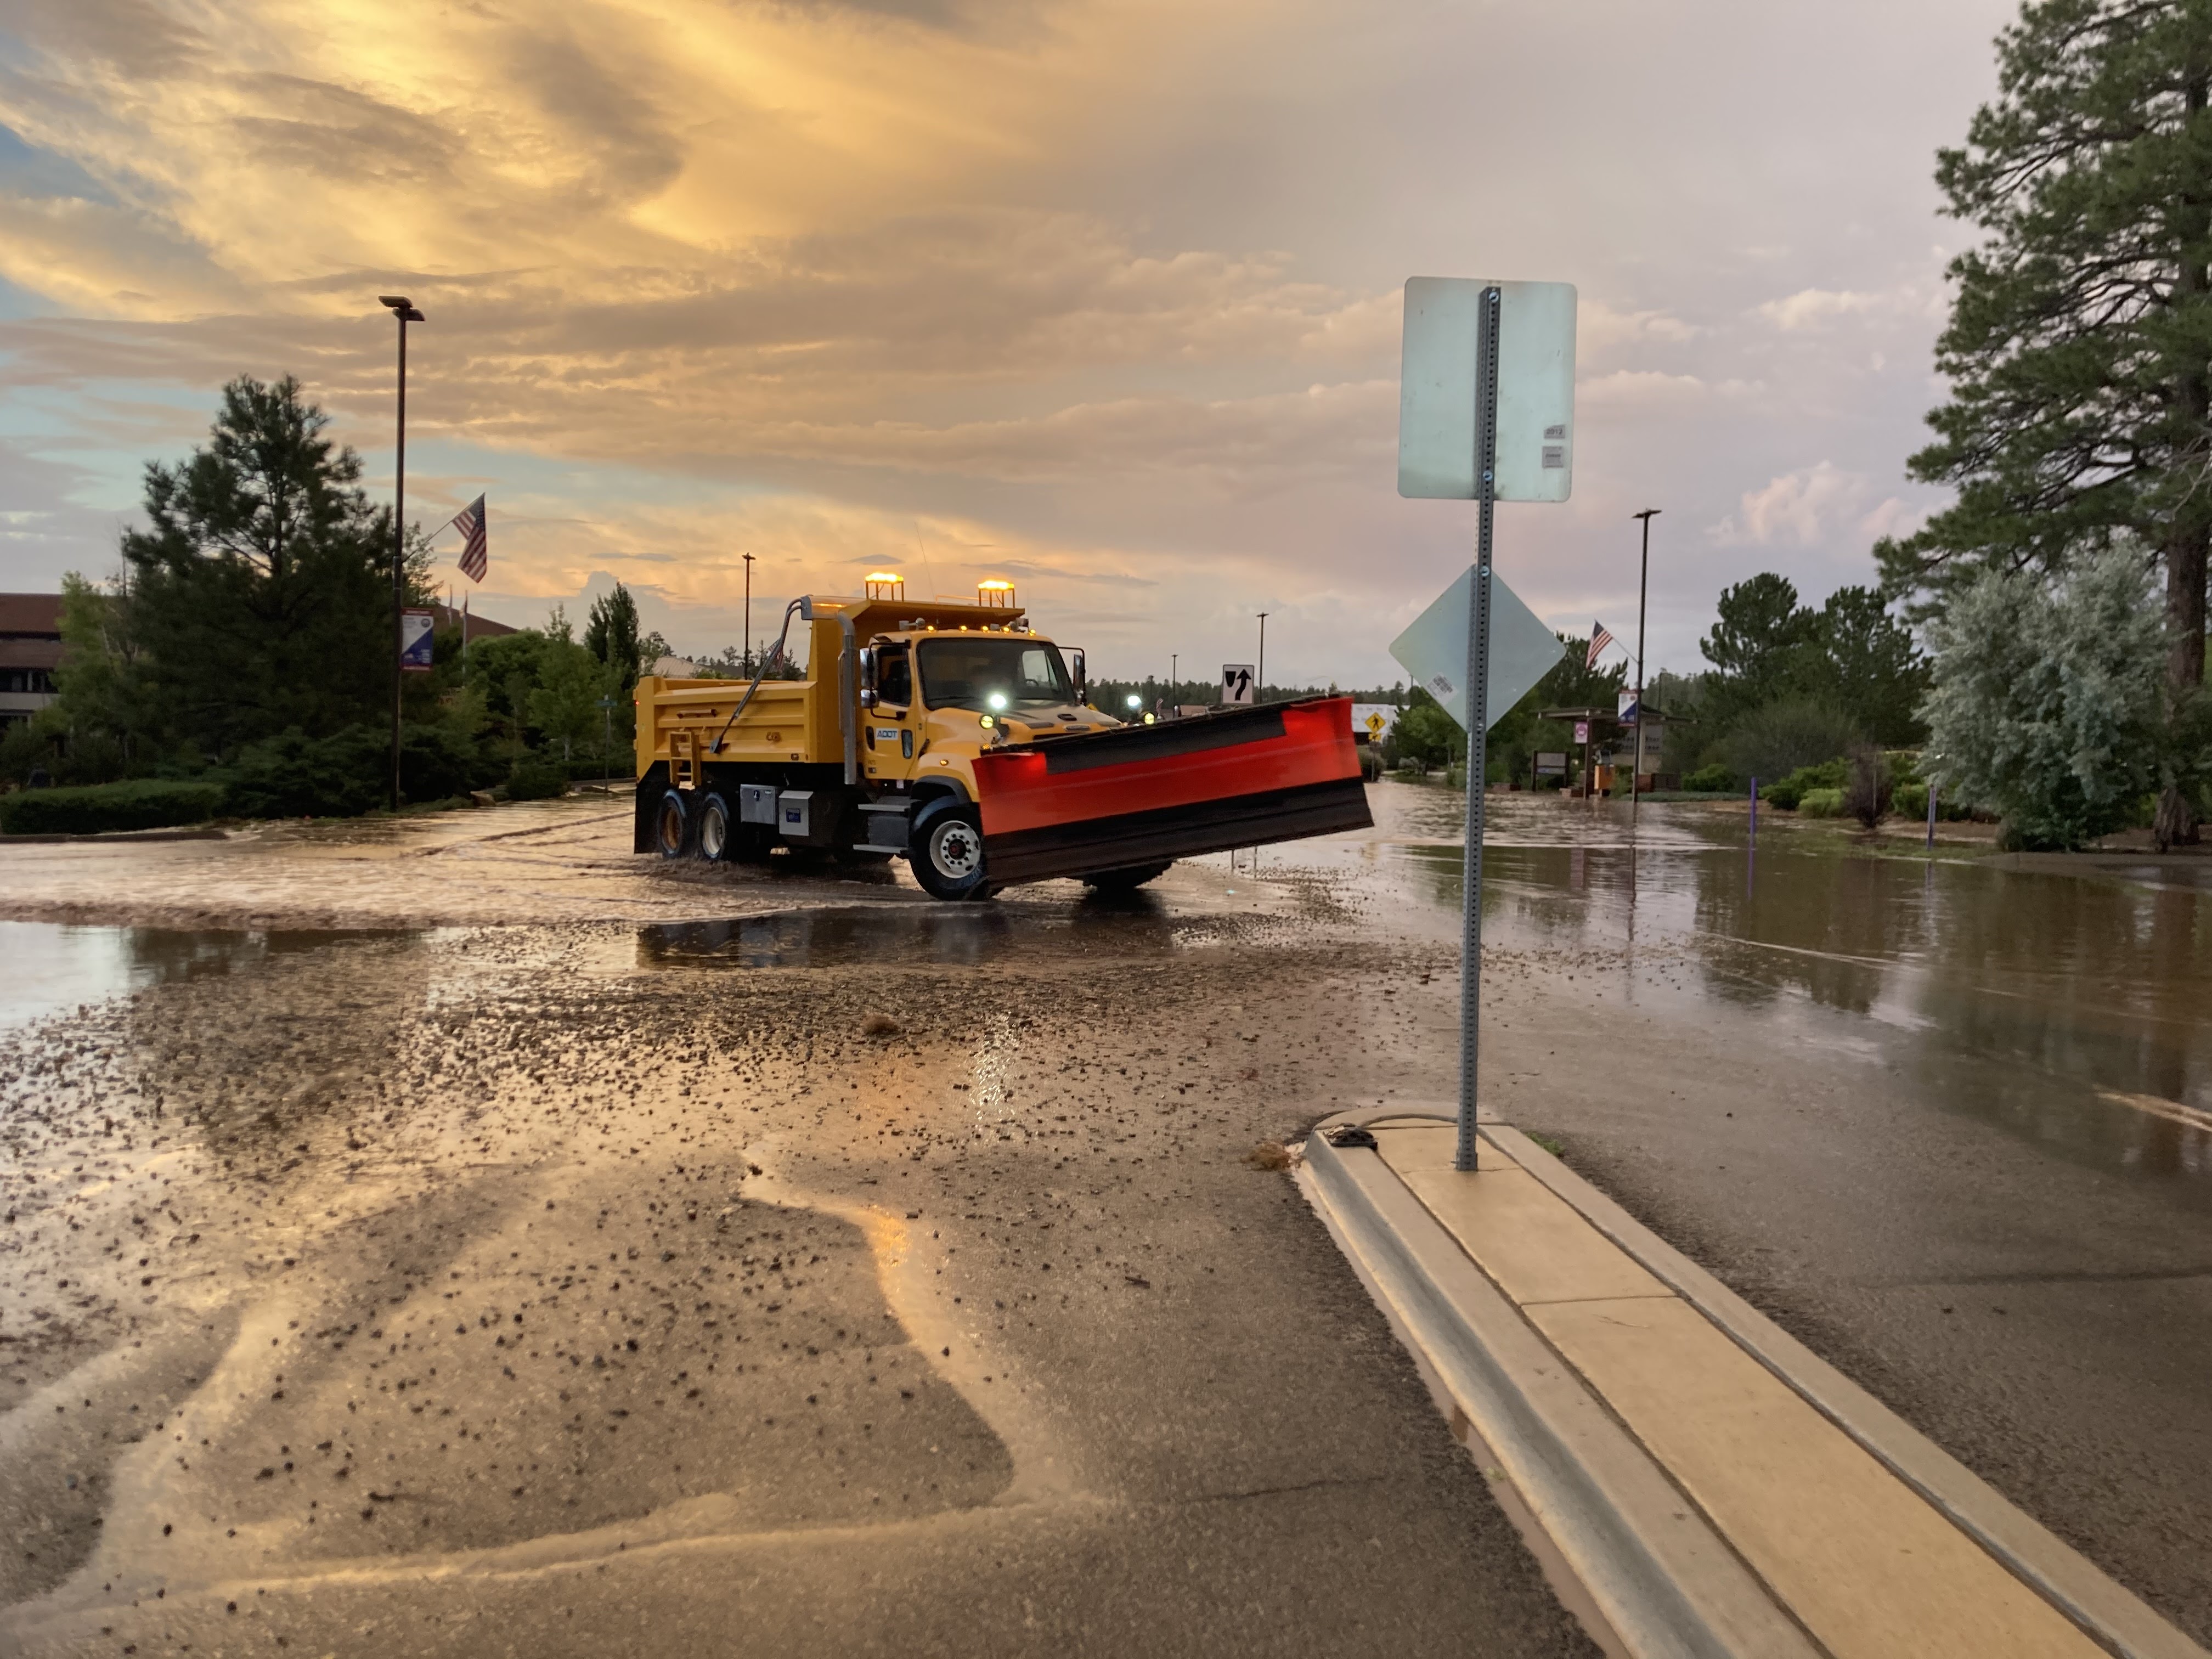 A snow plow in a flooded street clears water and debris from the roadway after rainstorm.